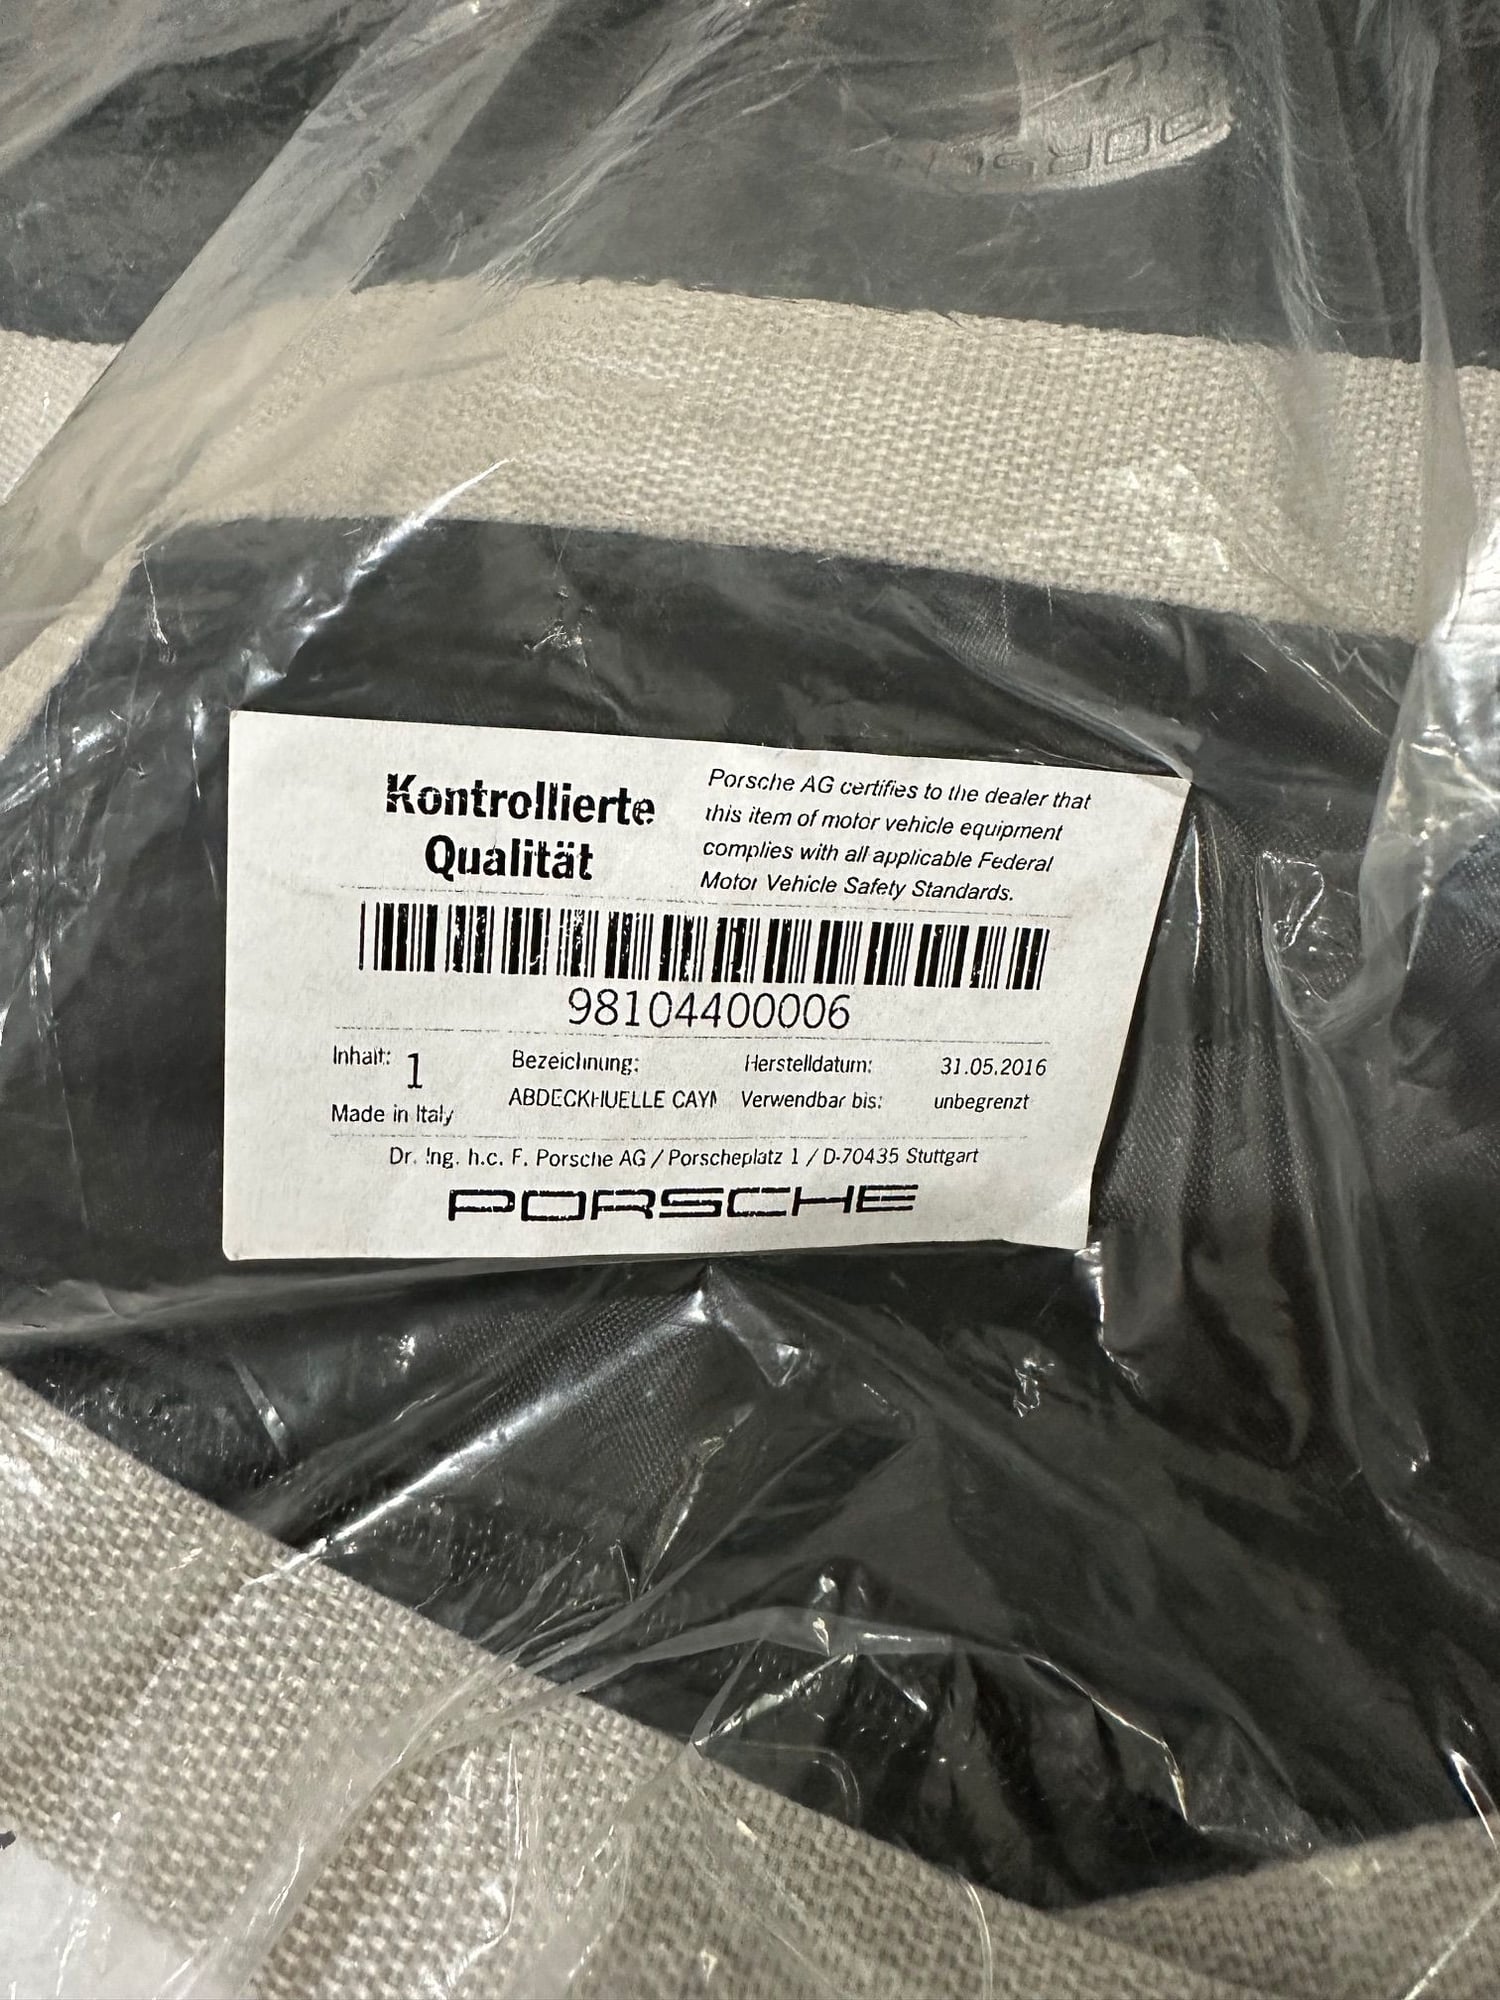 Miscellaneous - 981 Cayman GT4 Indoor Car Cover Part No. 981 044 000 06 Genuine Porsche Brand New - New - Sugar Land, TX 77479, United States